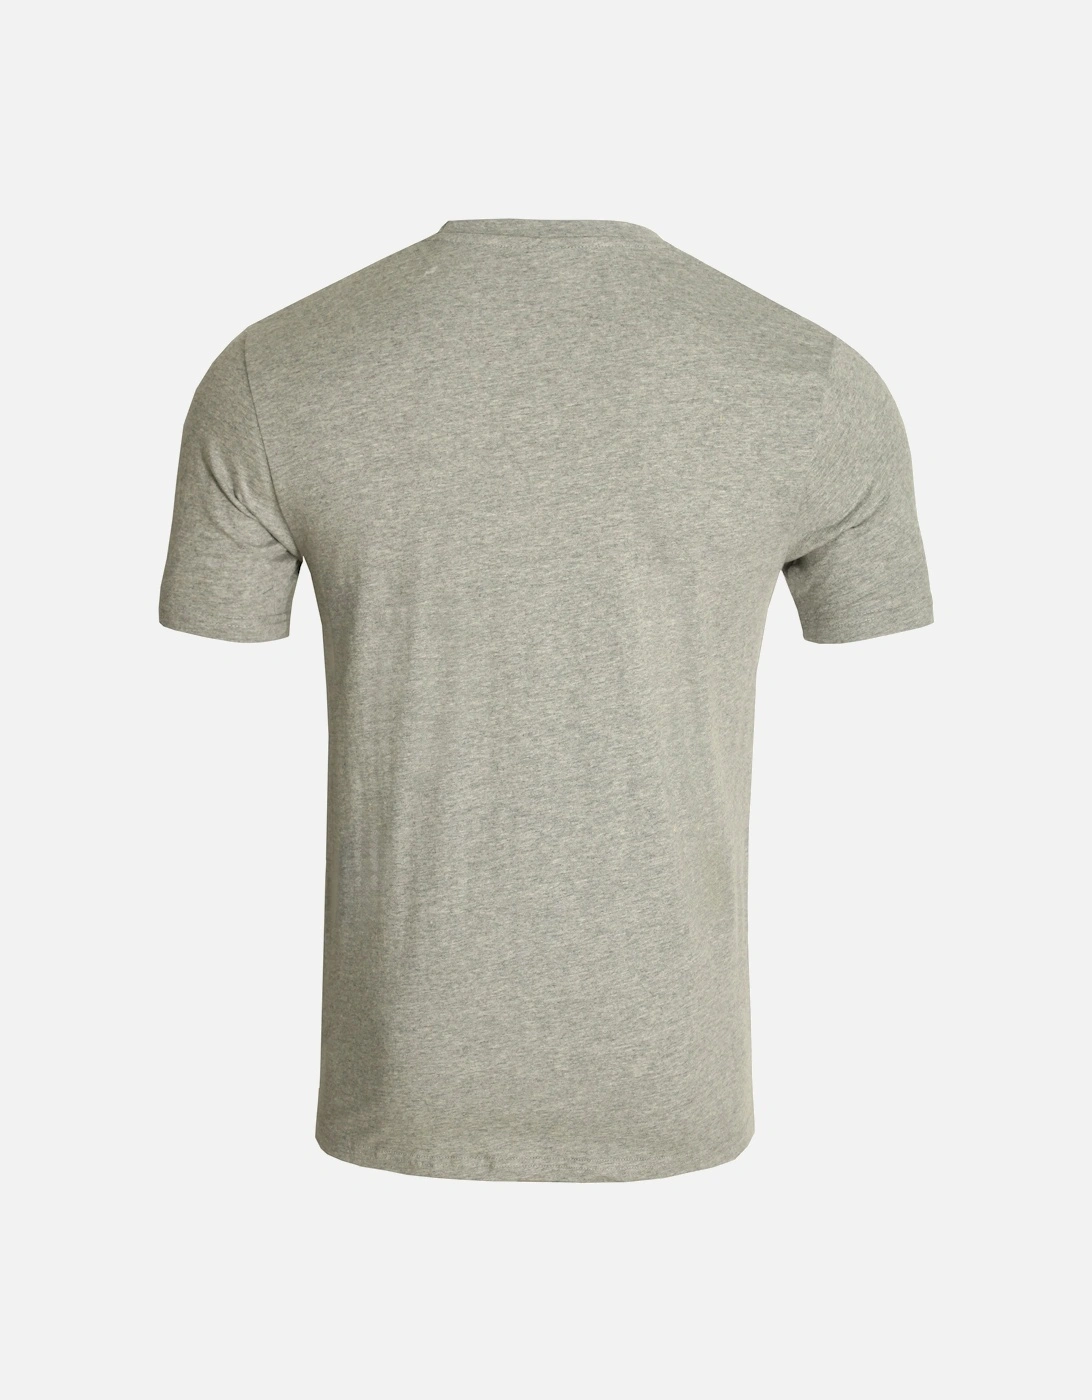 Canaletto T-Shirt | Grey Marl